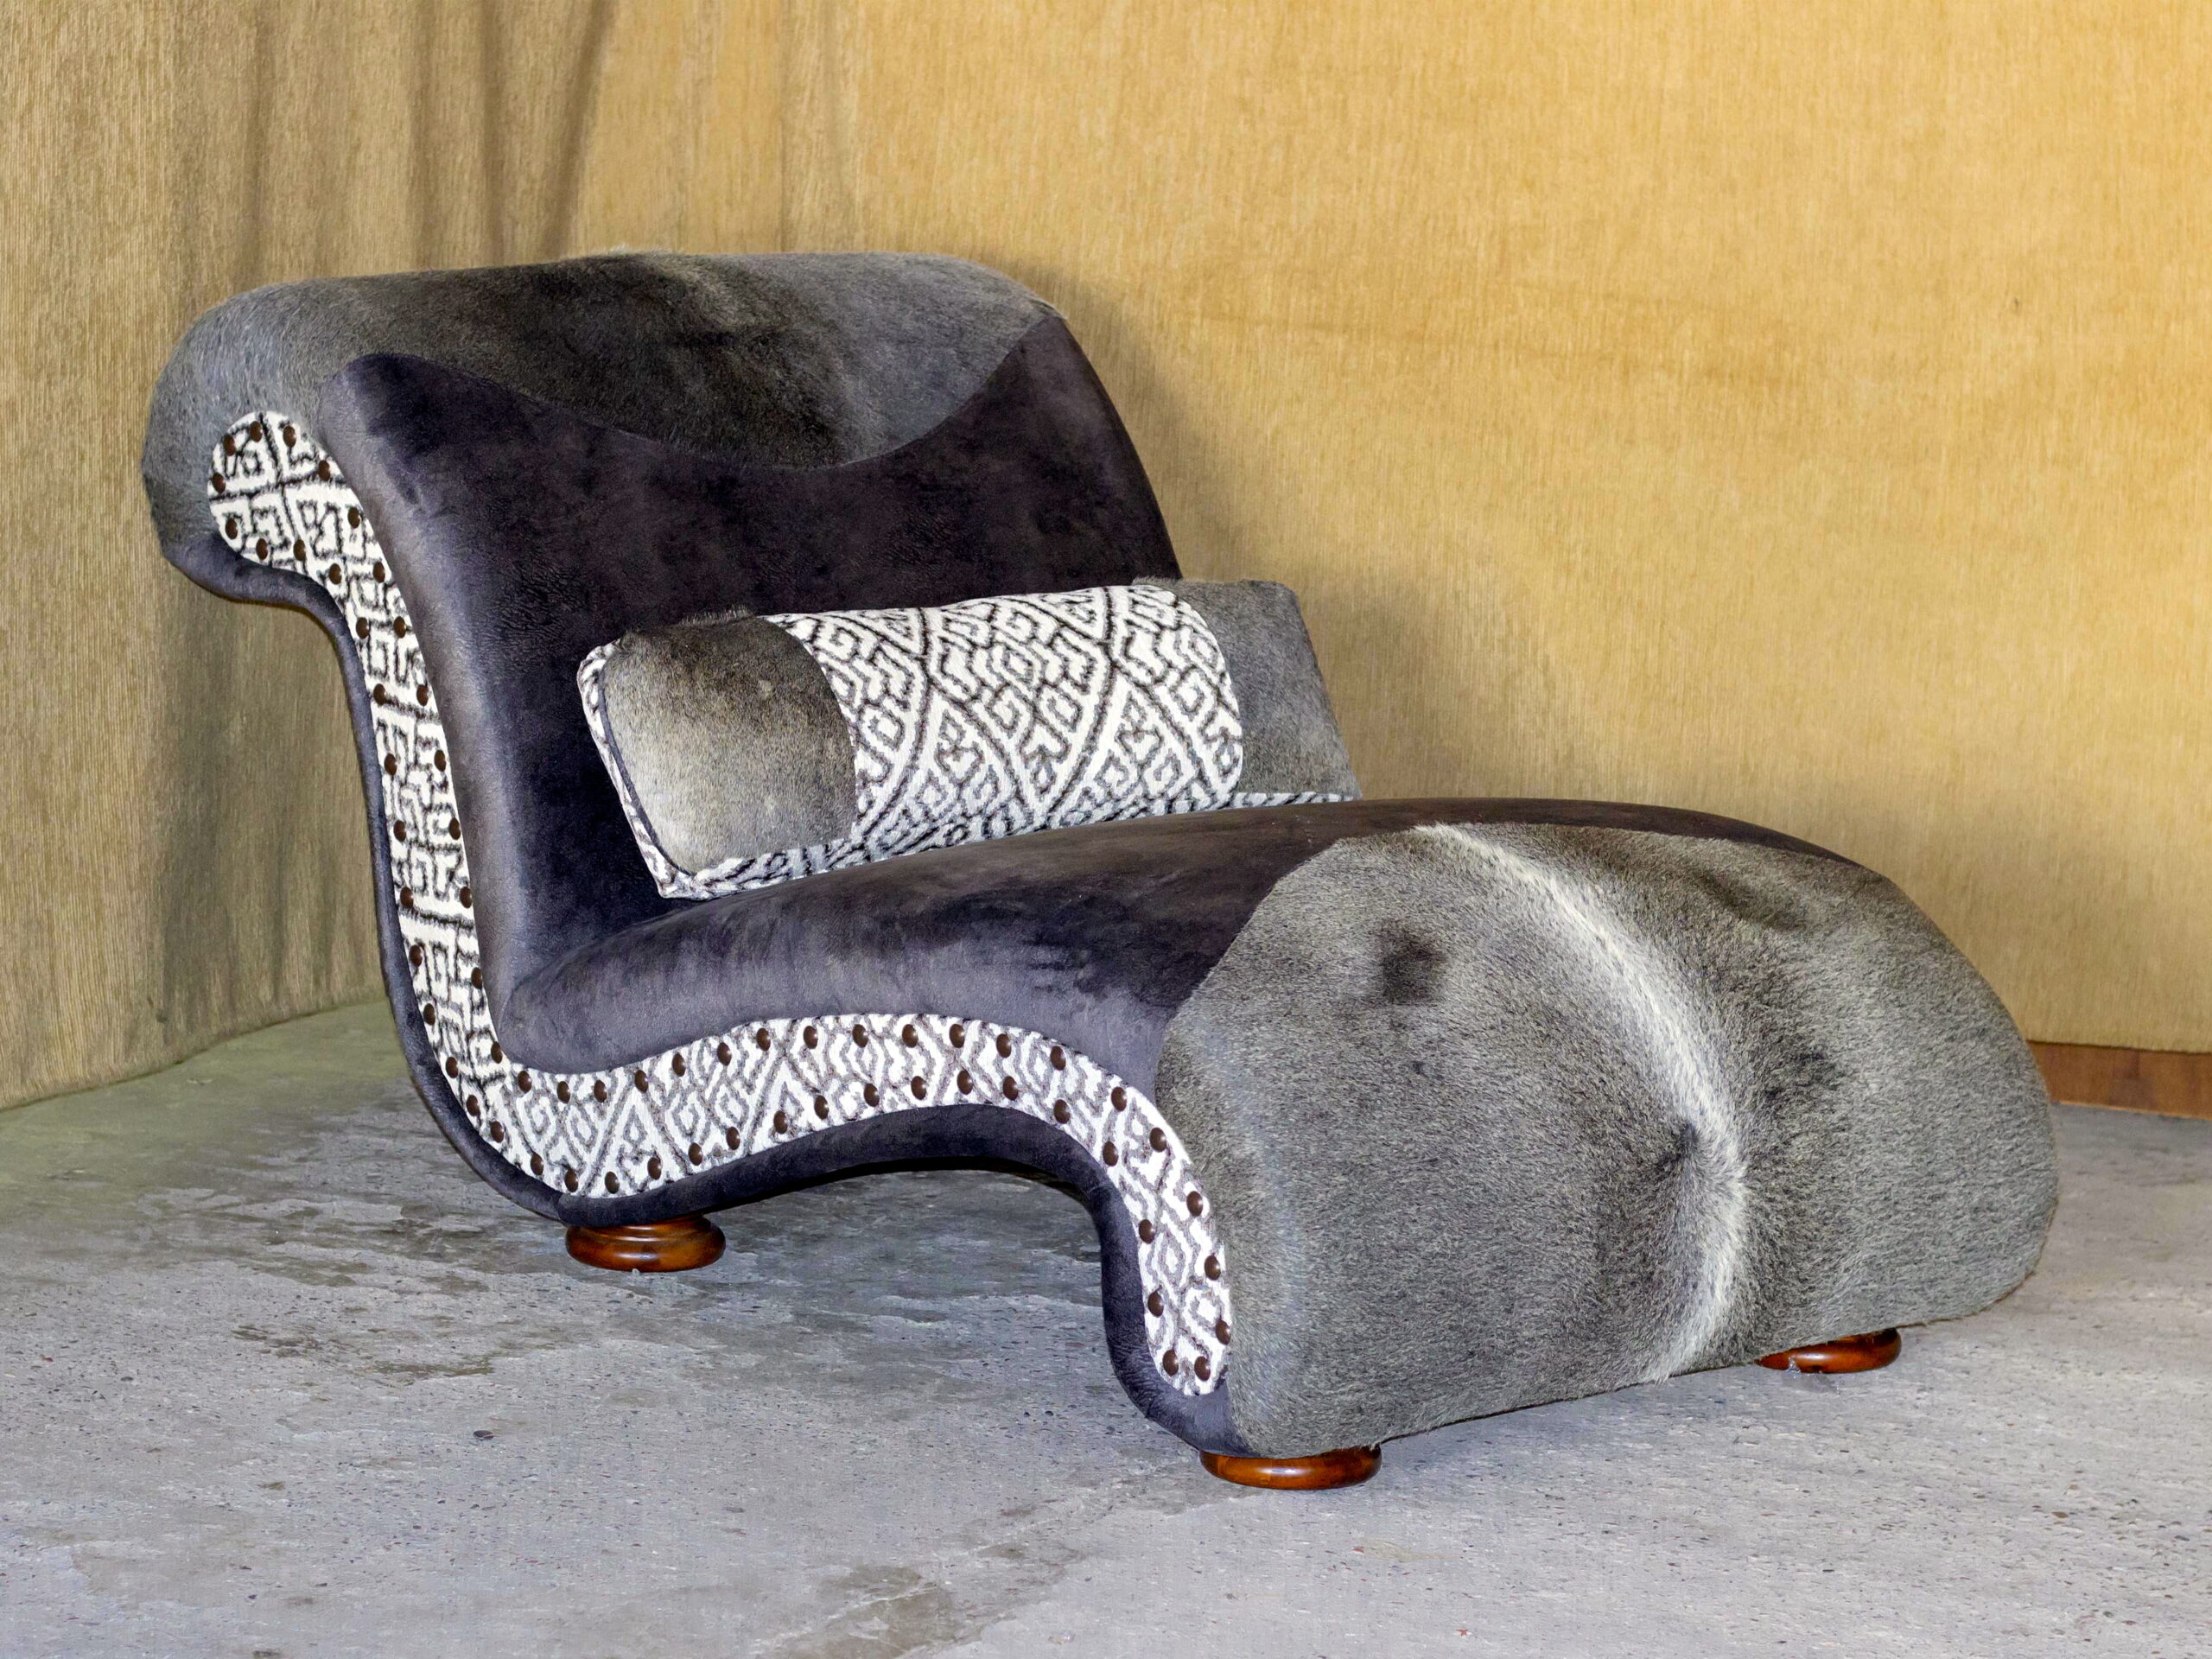 Fabric Chaise Lounge